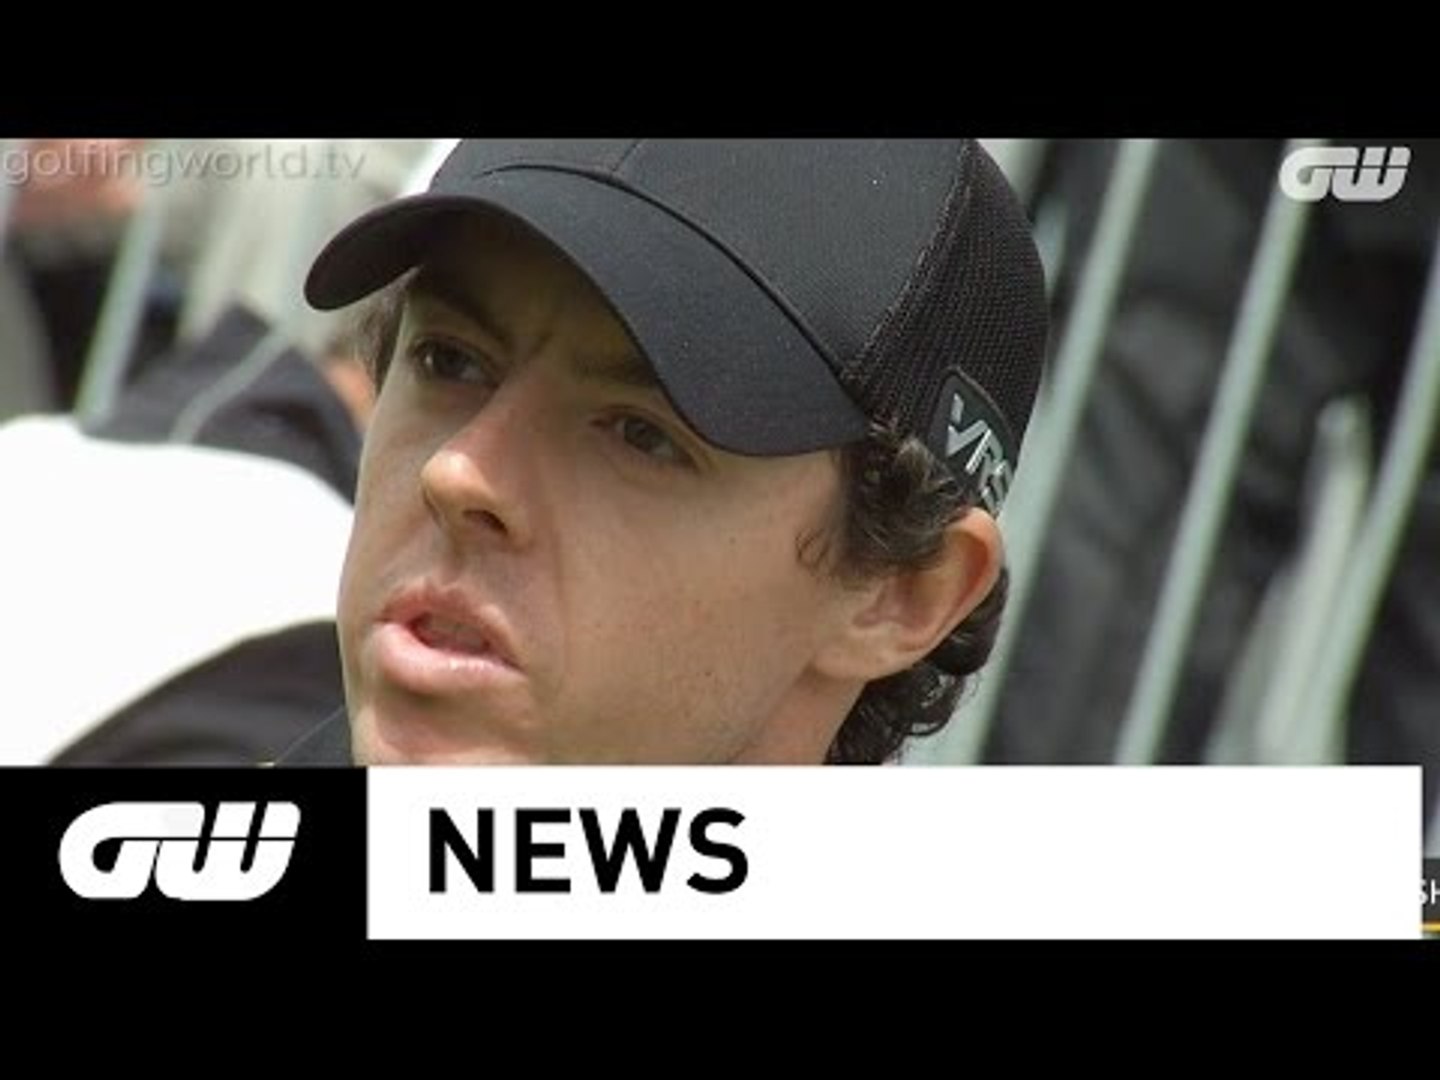 ⁣GW News: Rory returns to defend in Sydney